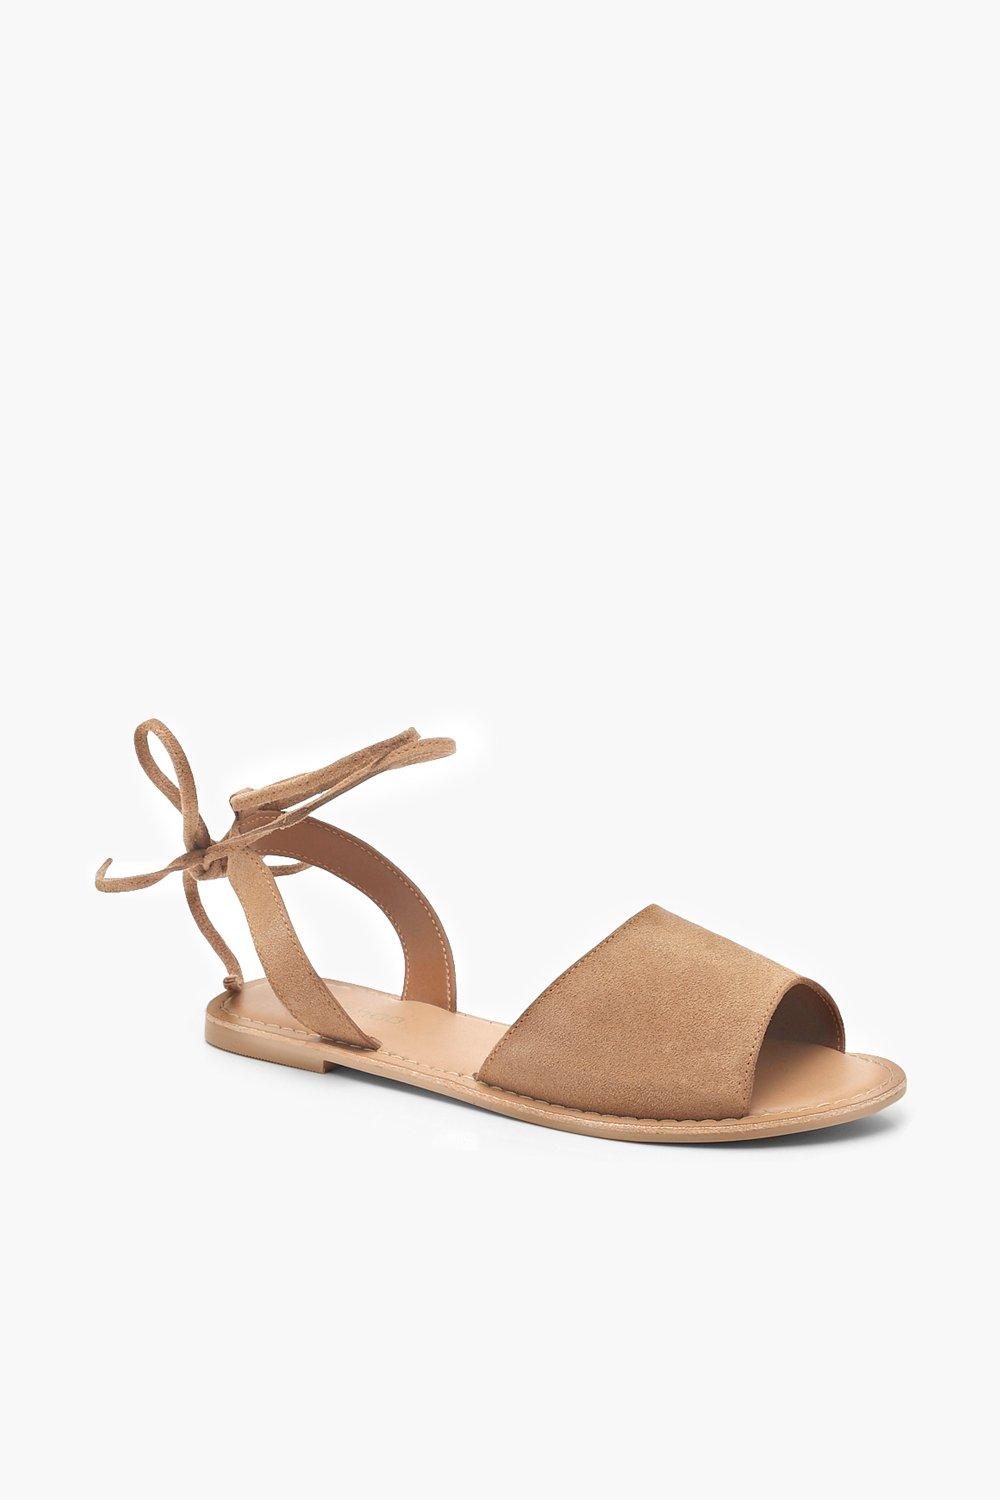 Sandals | Womens Chunky Sandals, Jelly Shoes & Flatforms | boohoo